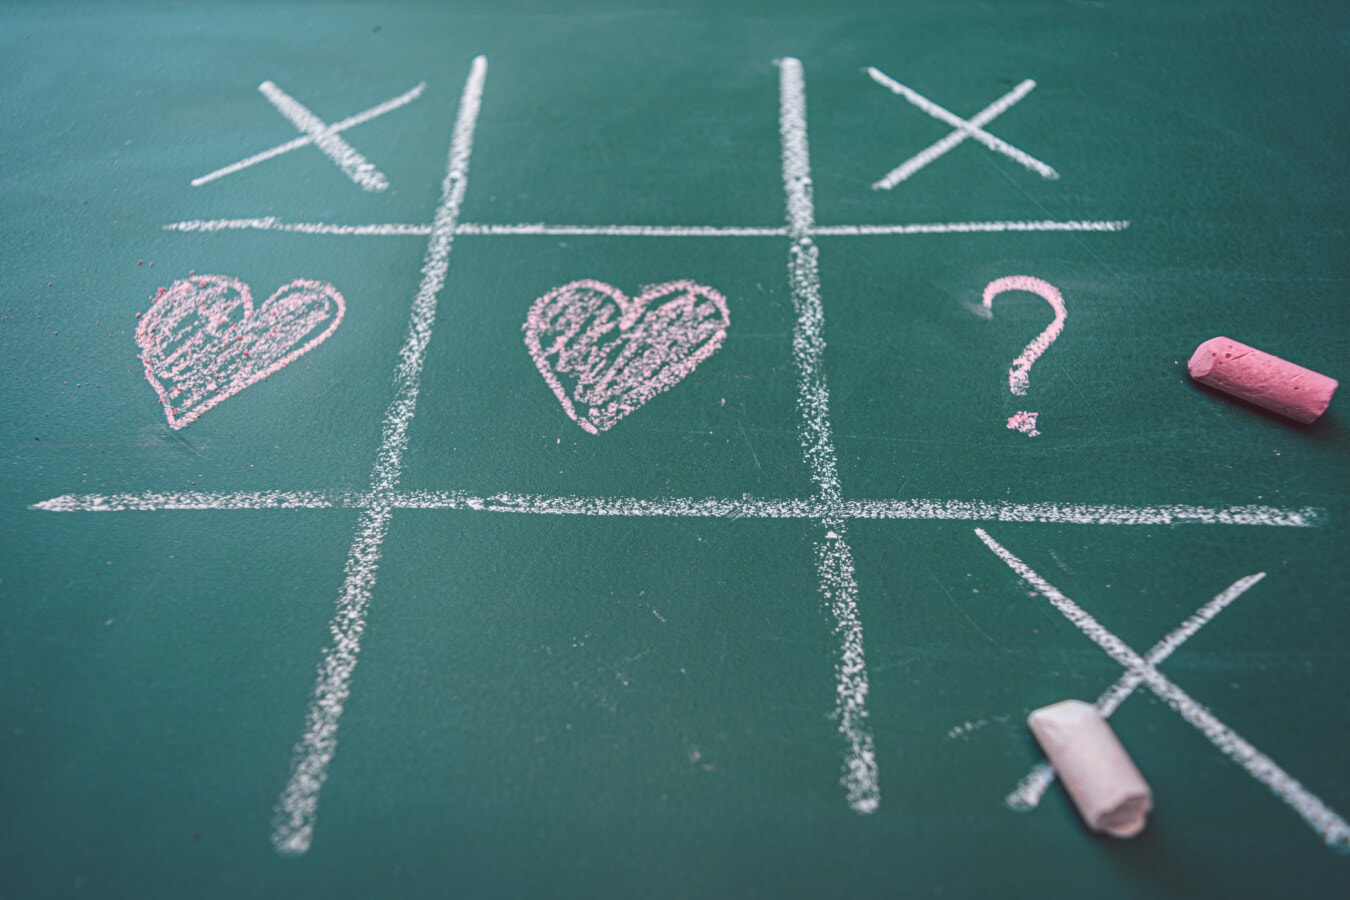 love win, Tic-Tac-Toe game, noughts and crosses, question mark, chalk, blackboard, mathematics, strategy